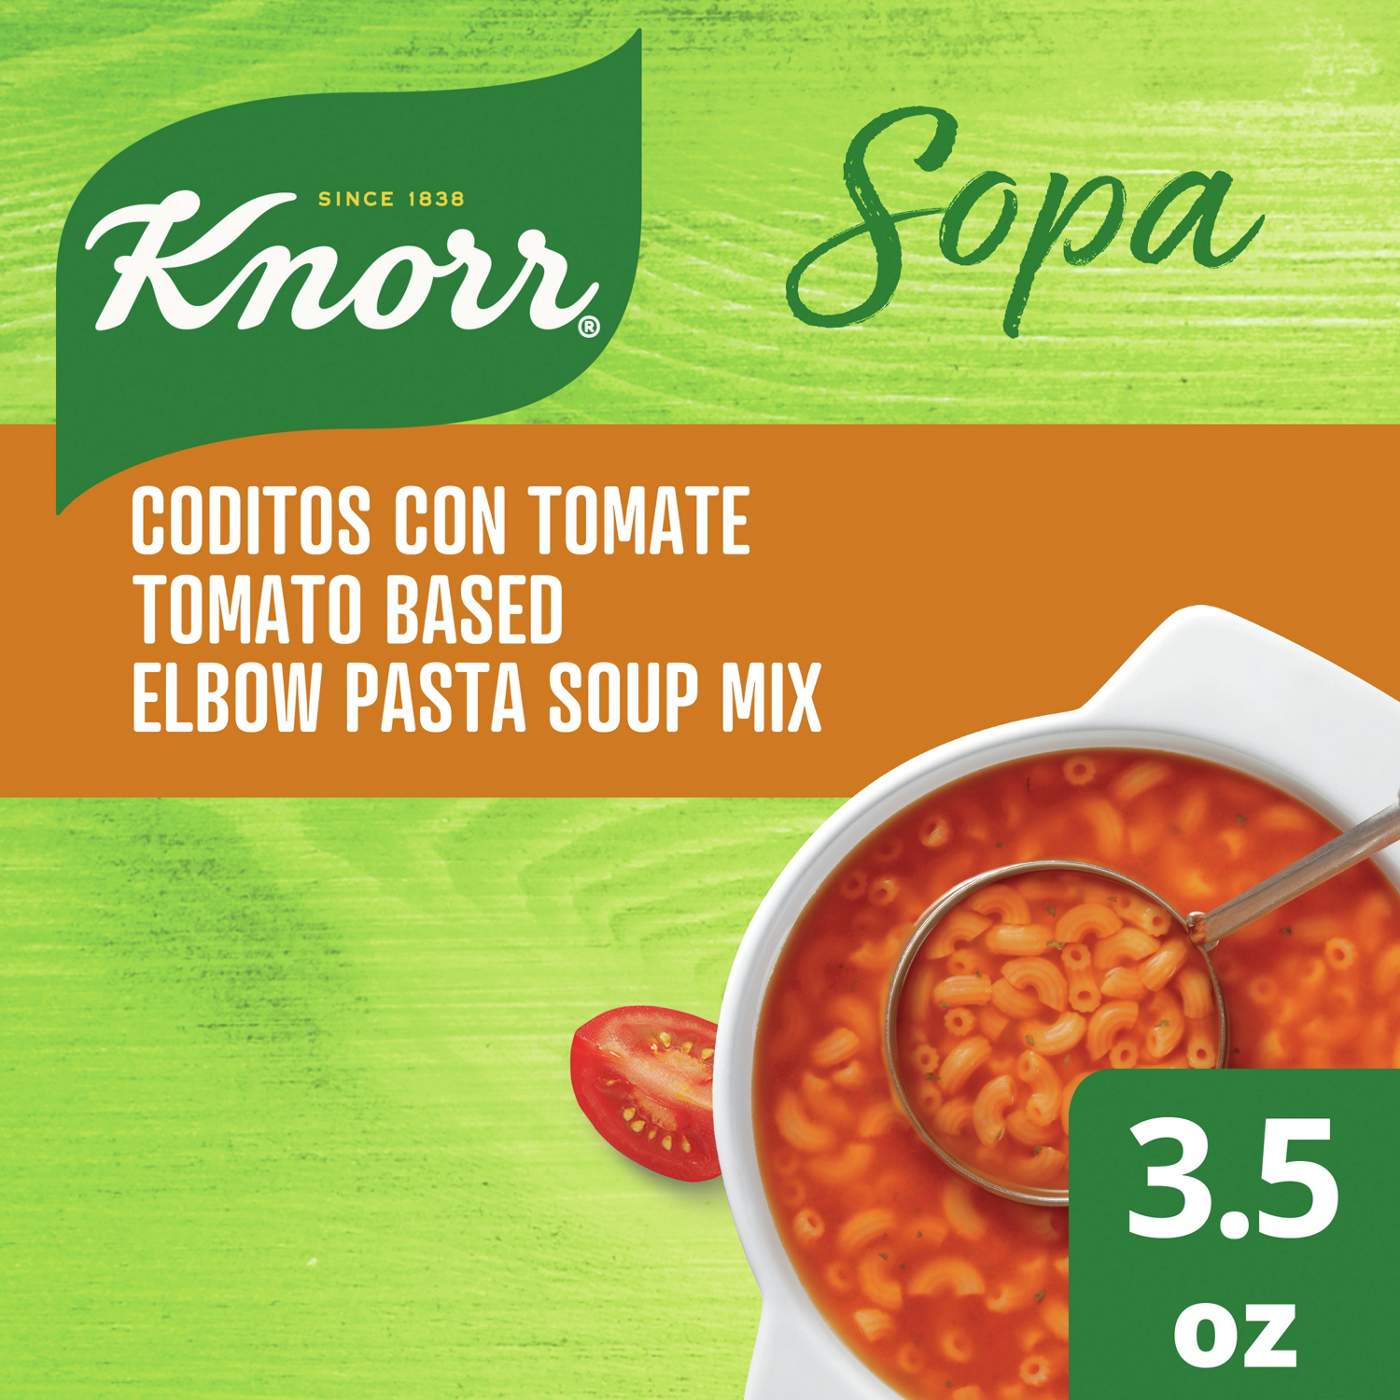 Knorr Sopa Elbow Pasta Tomato Soup Mix; image 6 of 7